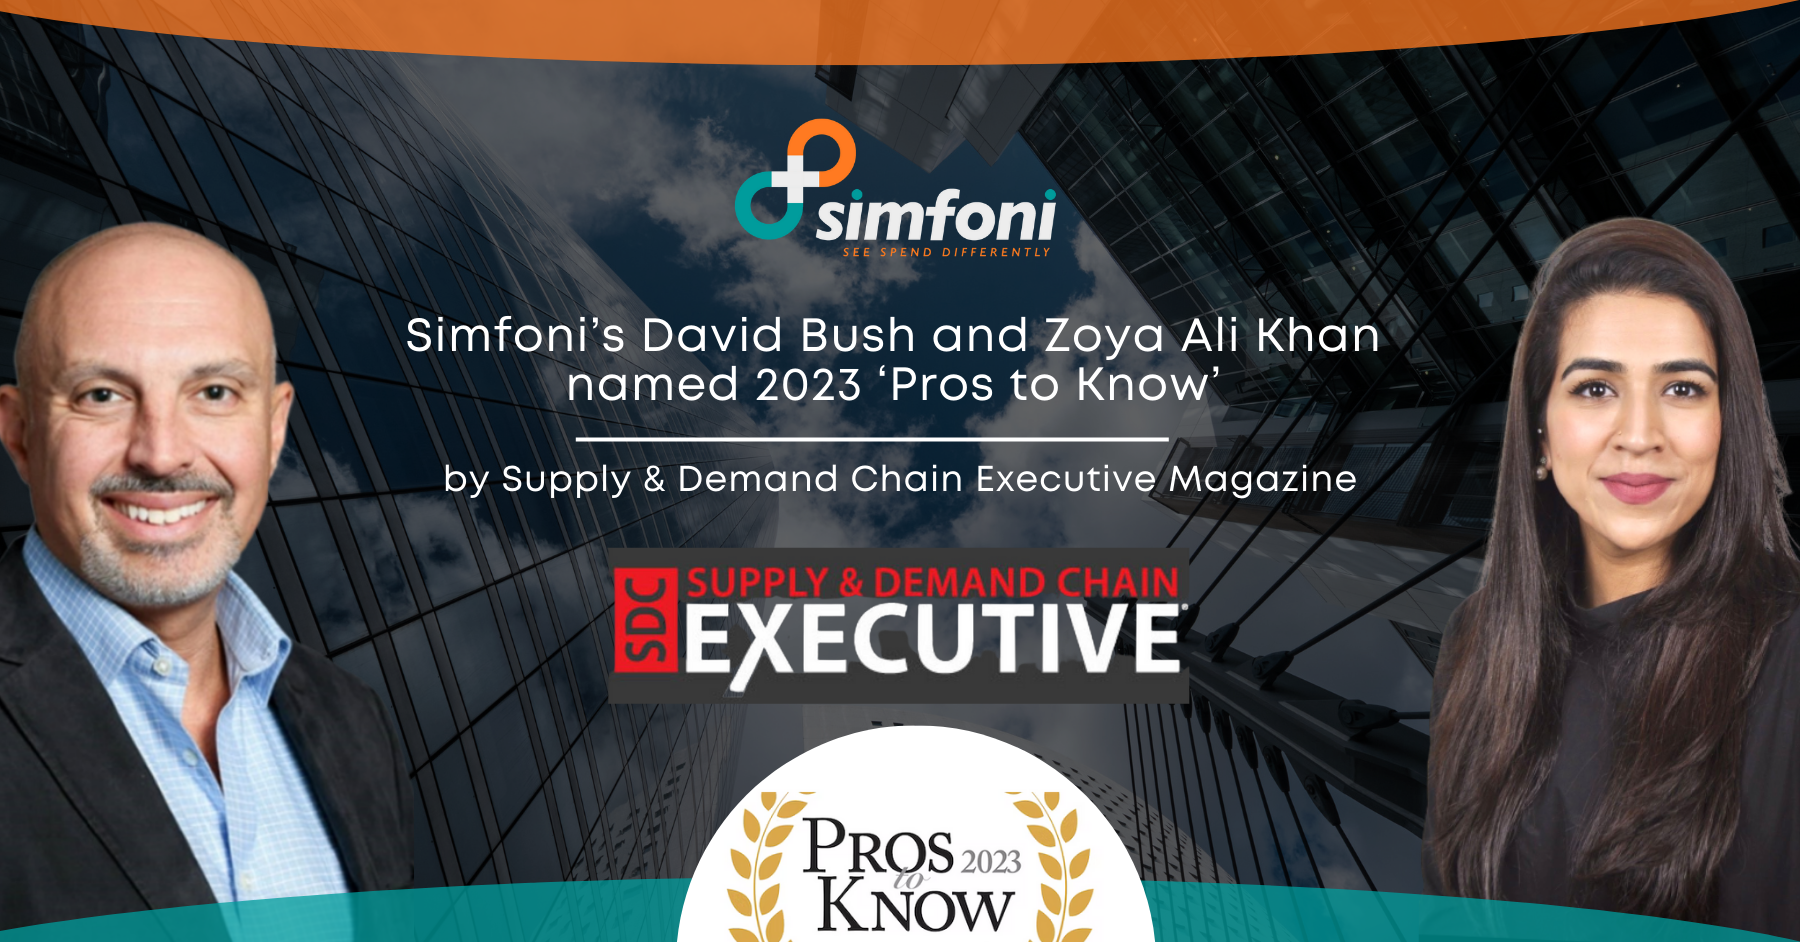 2023 ‘Pros to Know’ by Supply & Demand Chain Executive Magazine